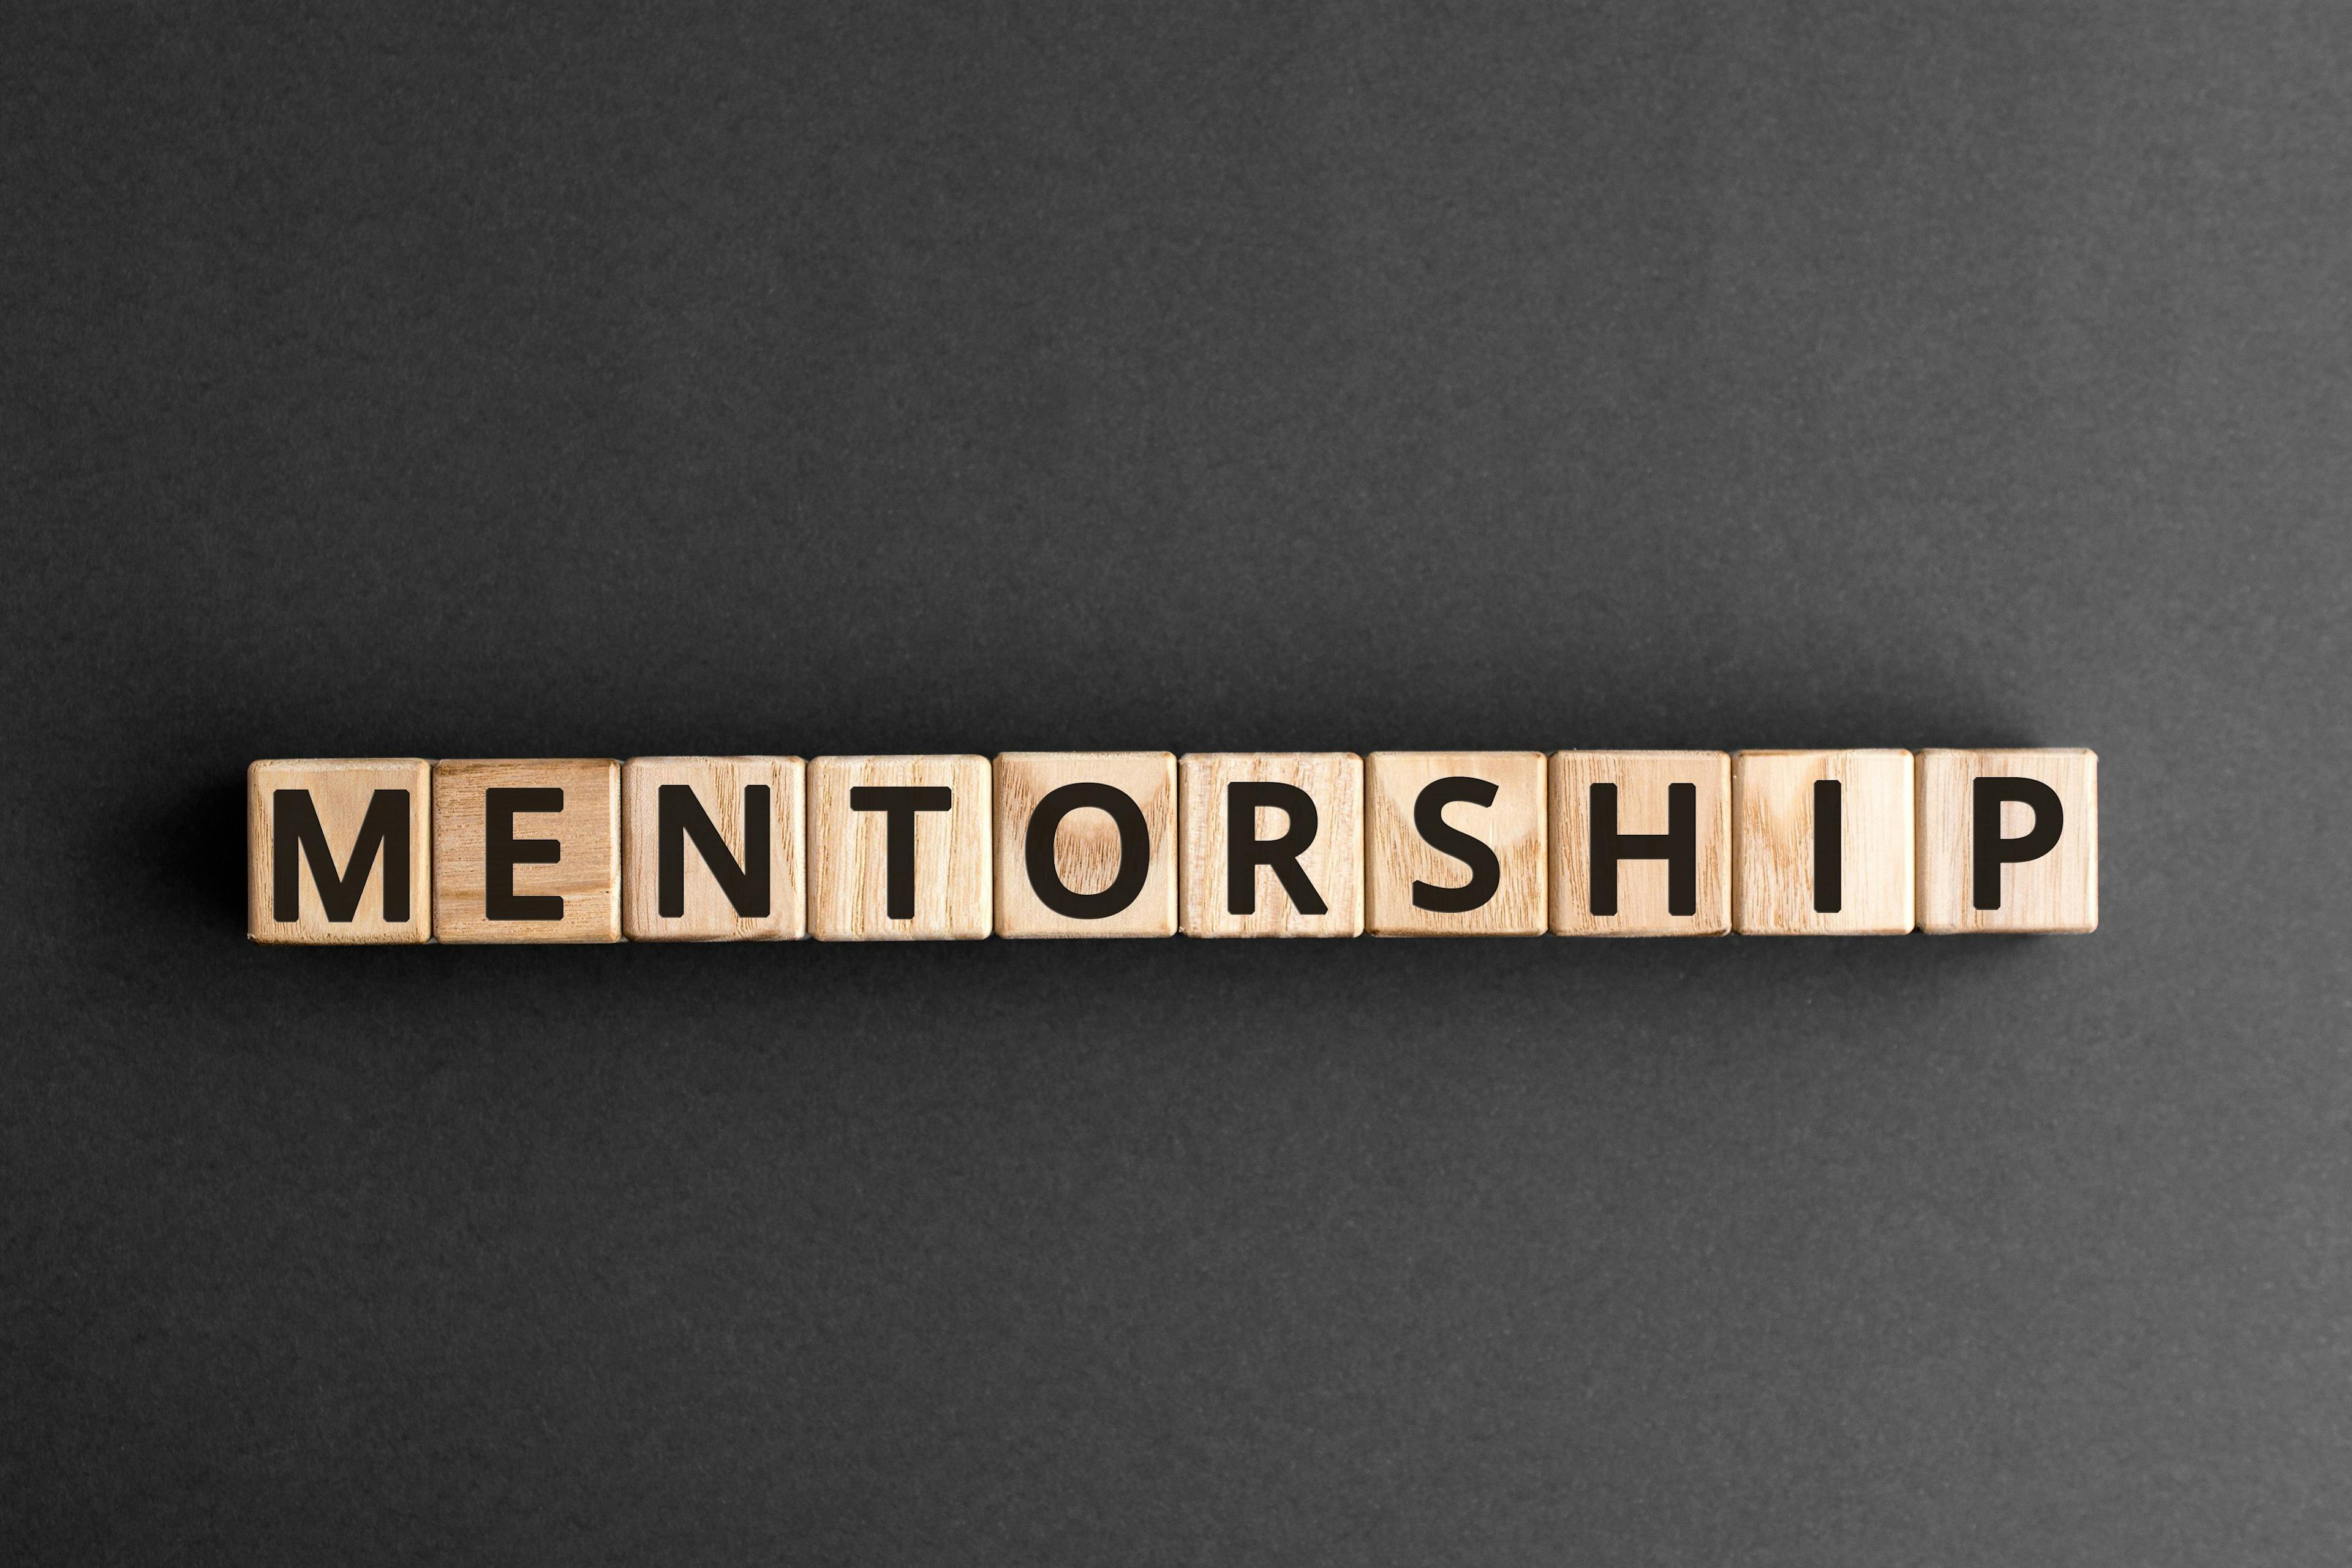 Are you ready to become a superstar mentor?